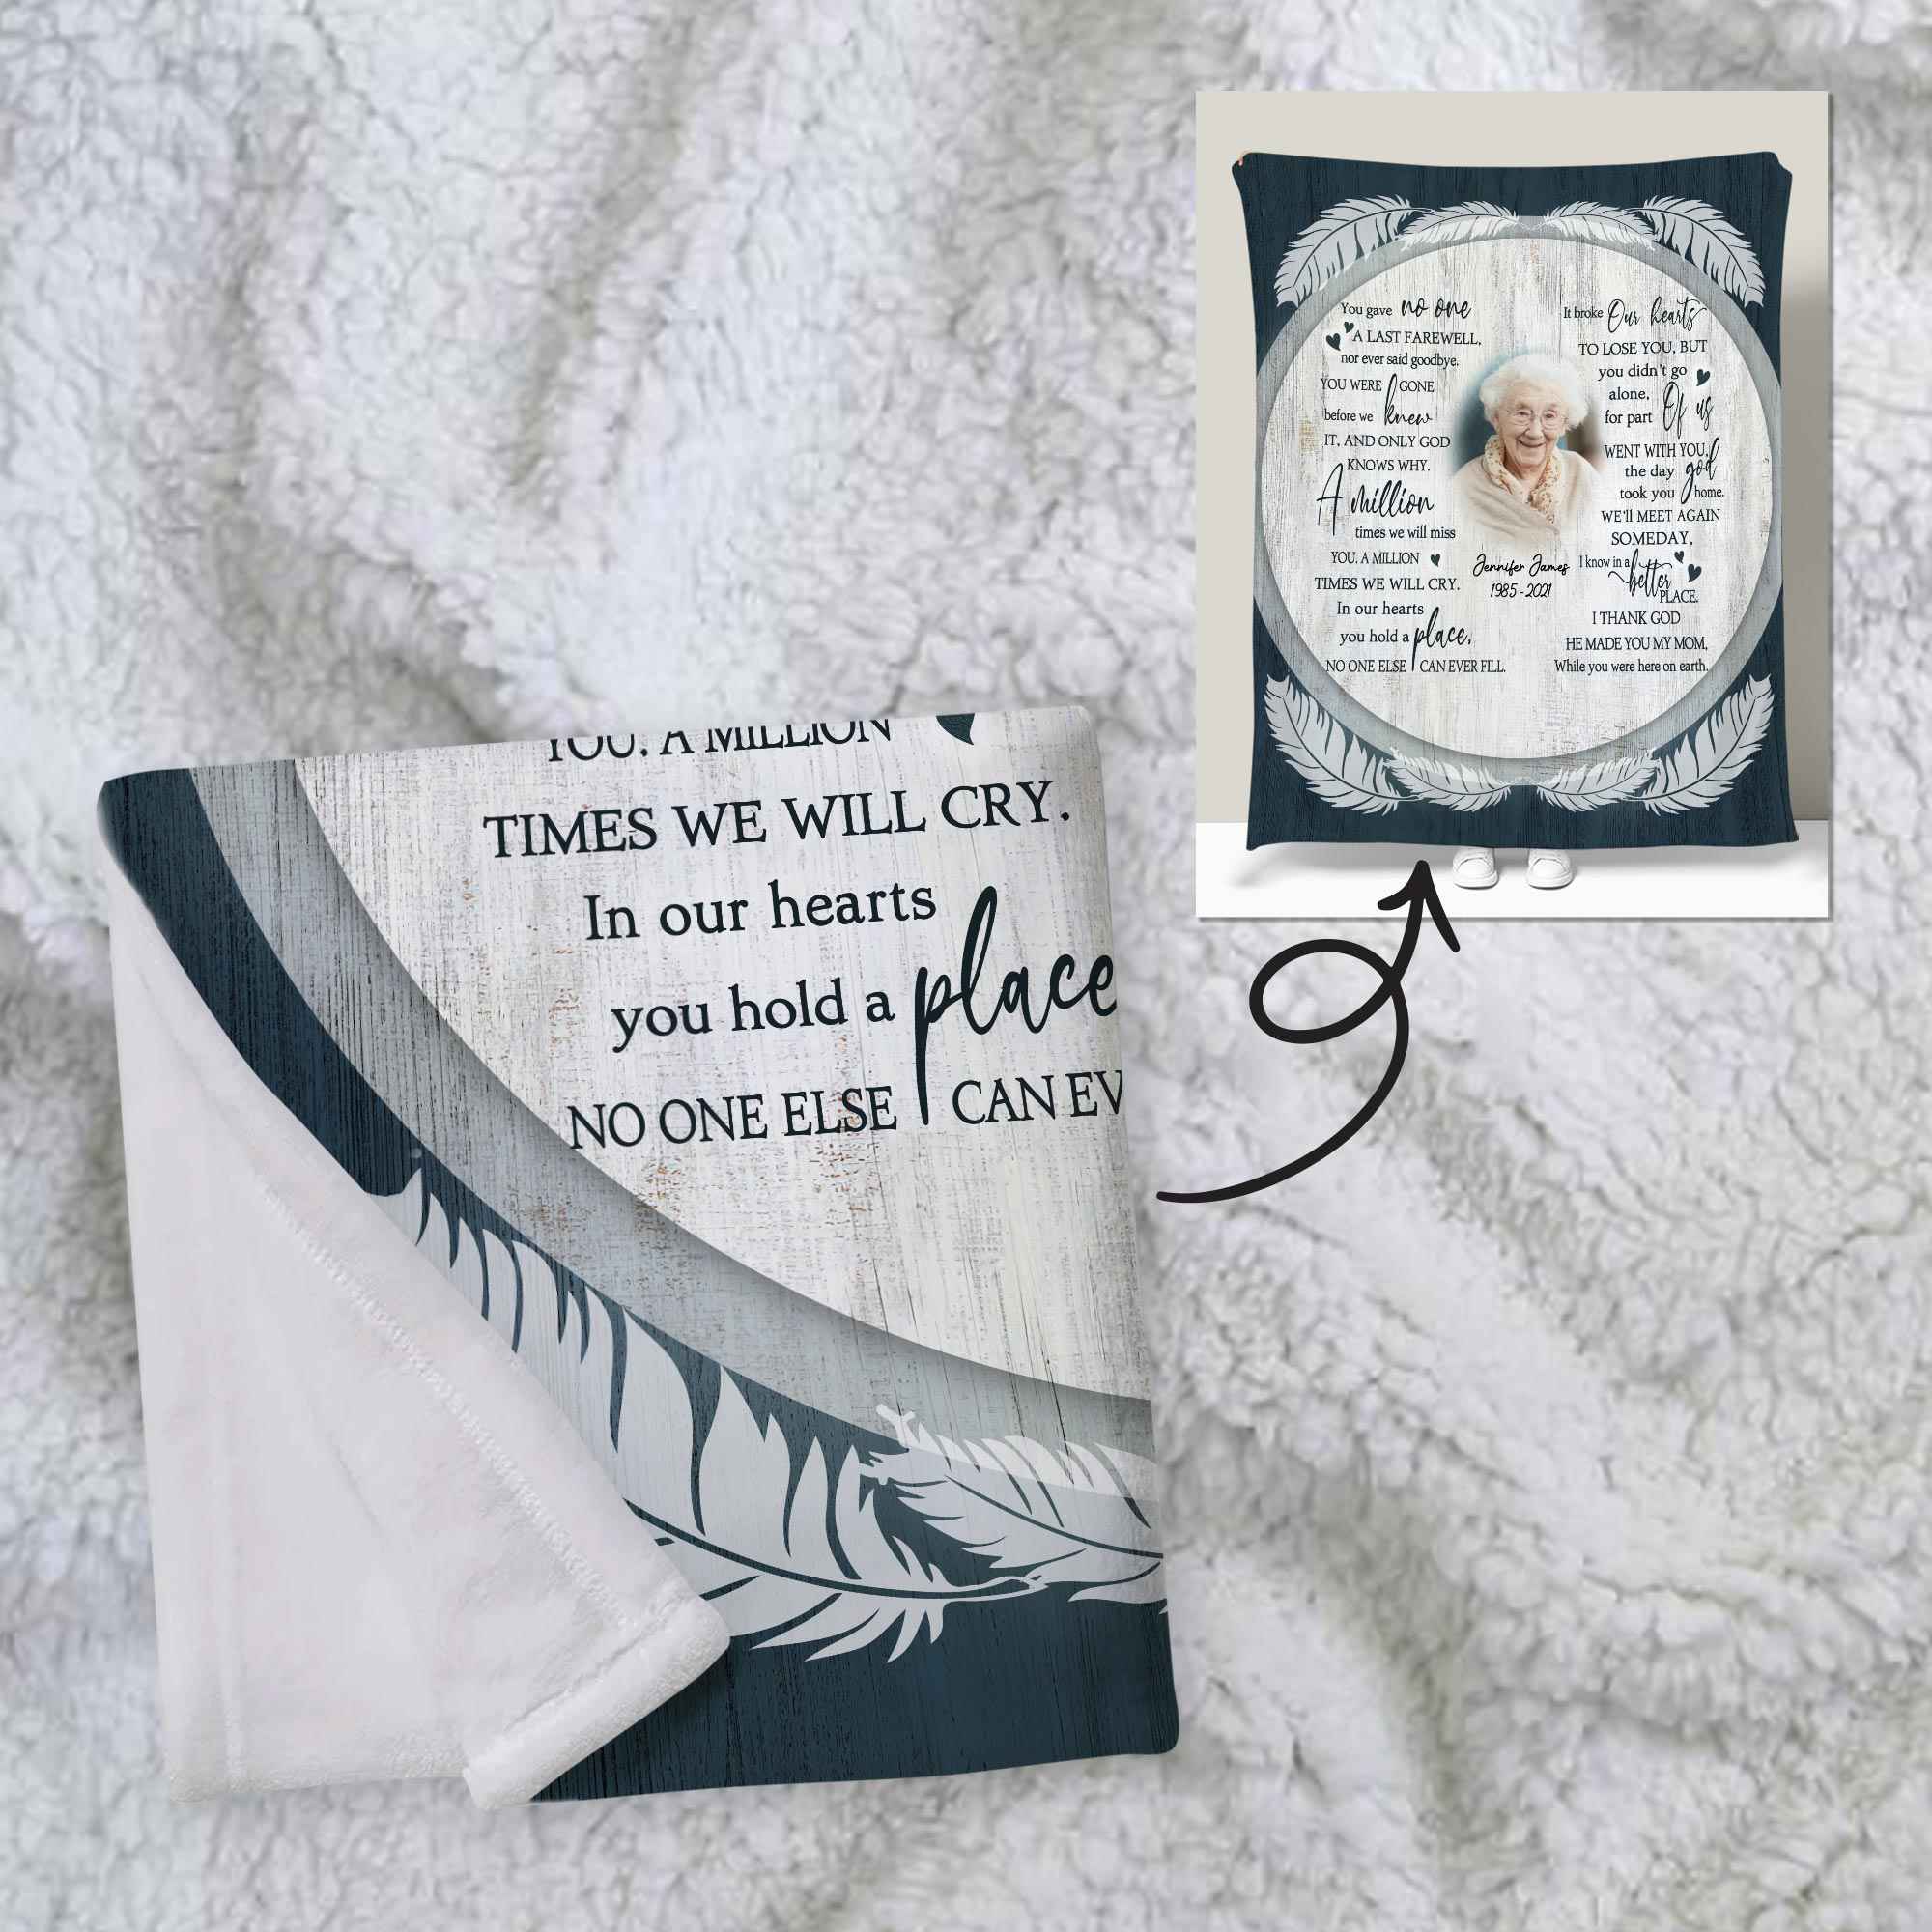 My Wife Passed Away Message, Personalized Memory Blankets With Photo